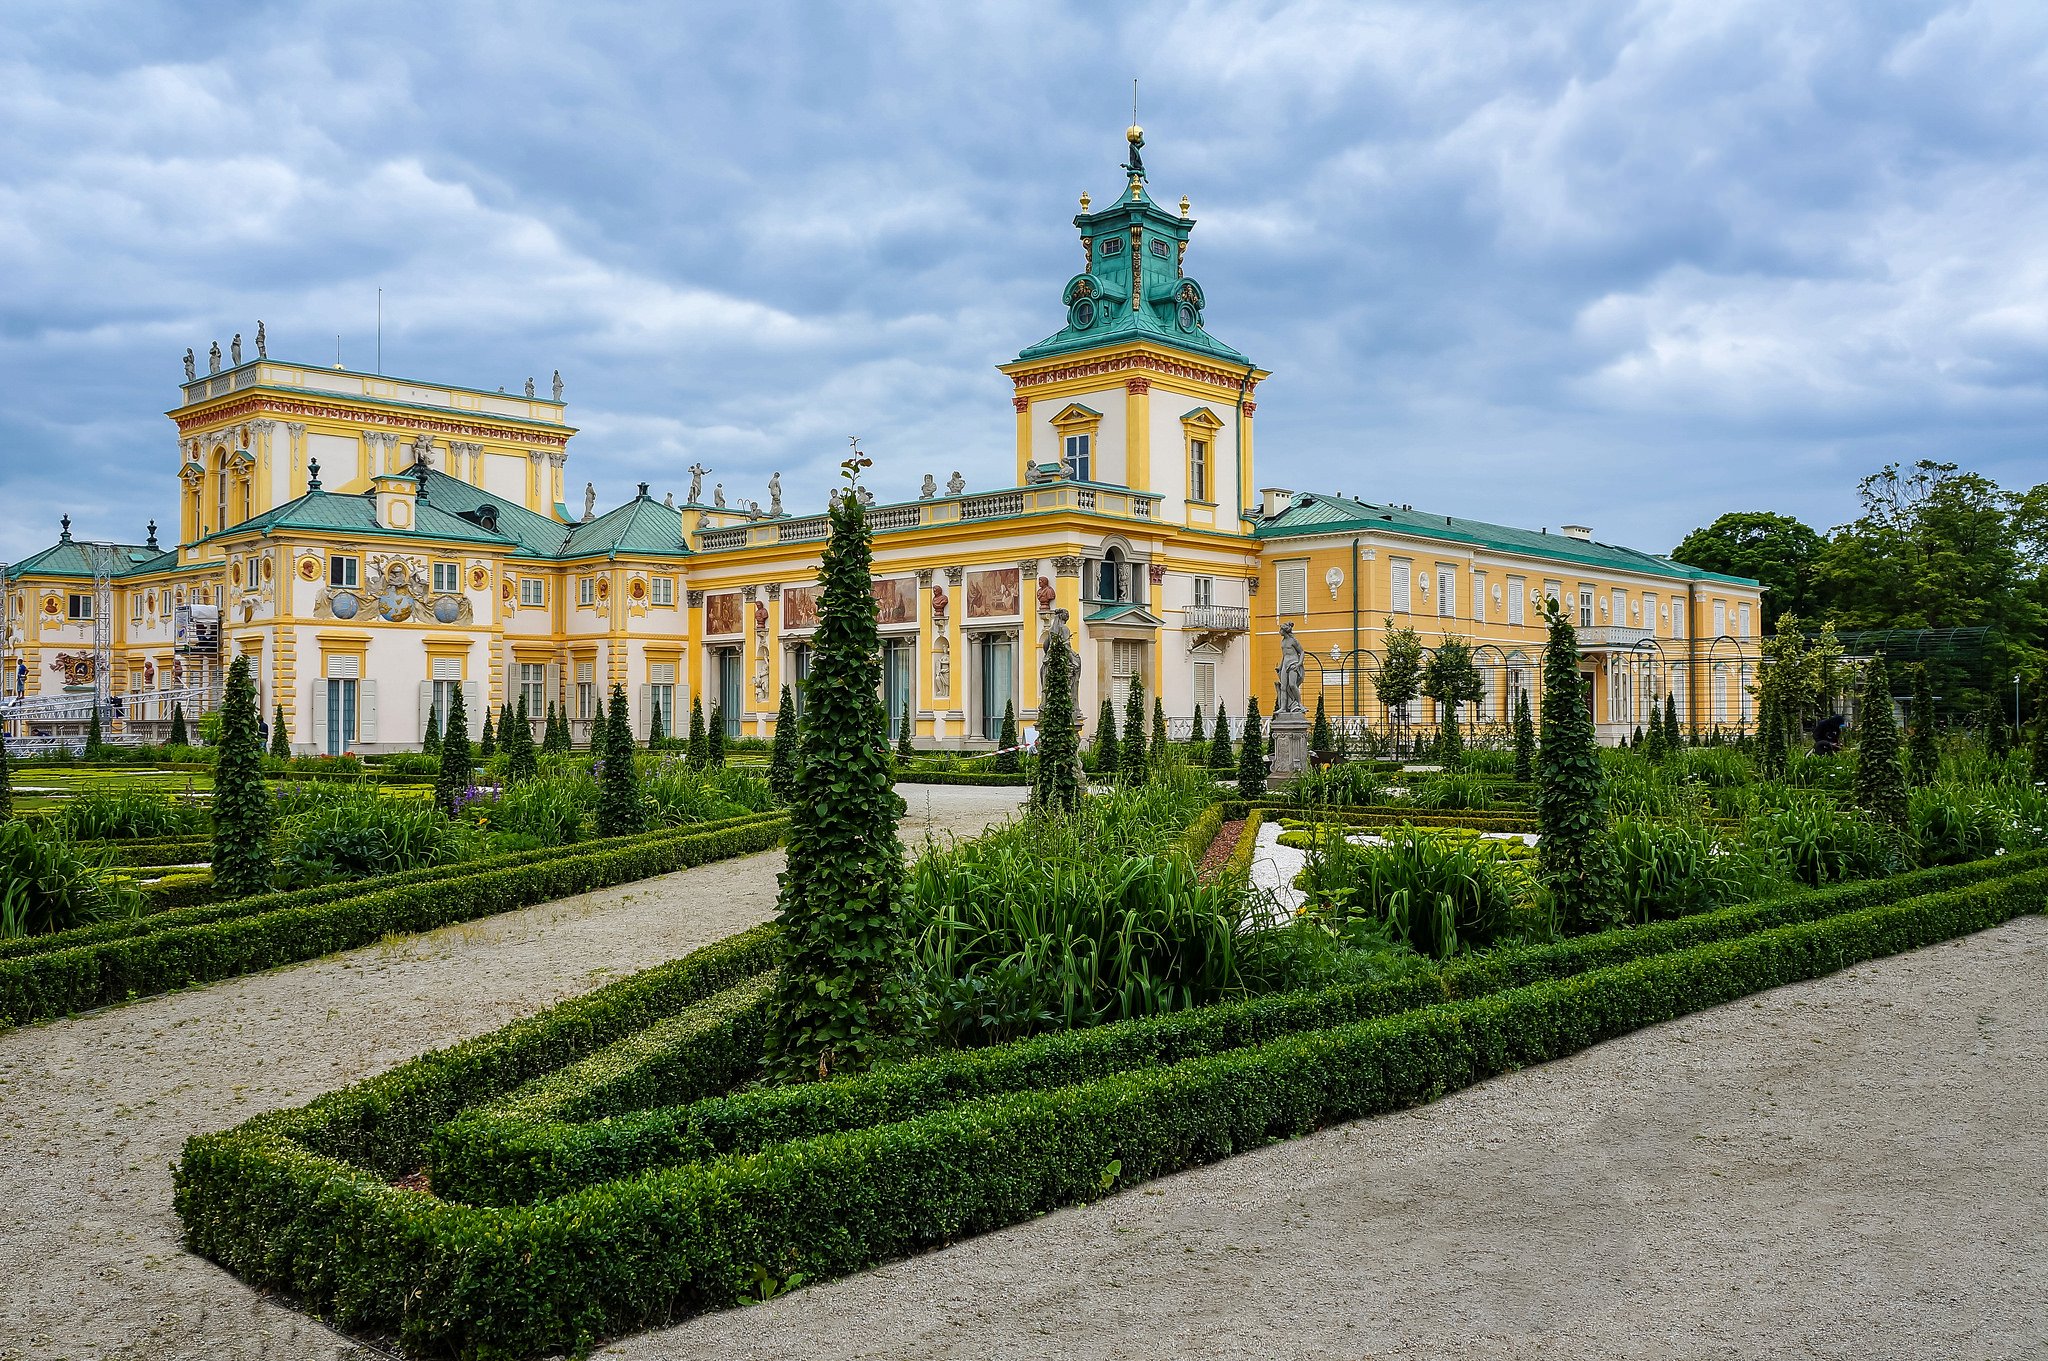 poland, Landscape, Palace, Shrubs, Warsaw, Wilanow, Palace, Cities Wallpaper